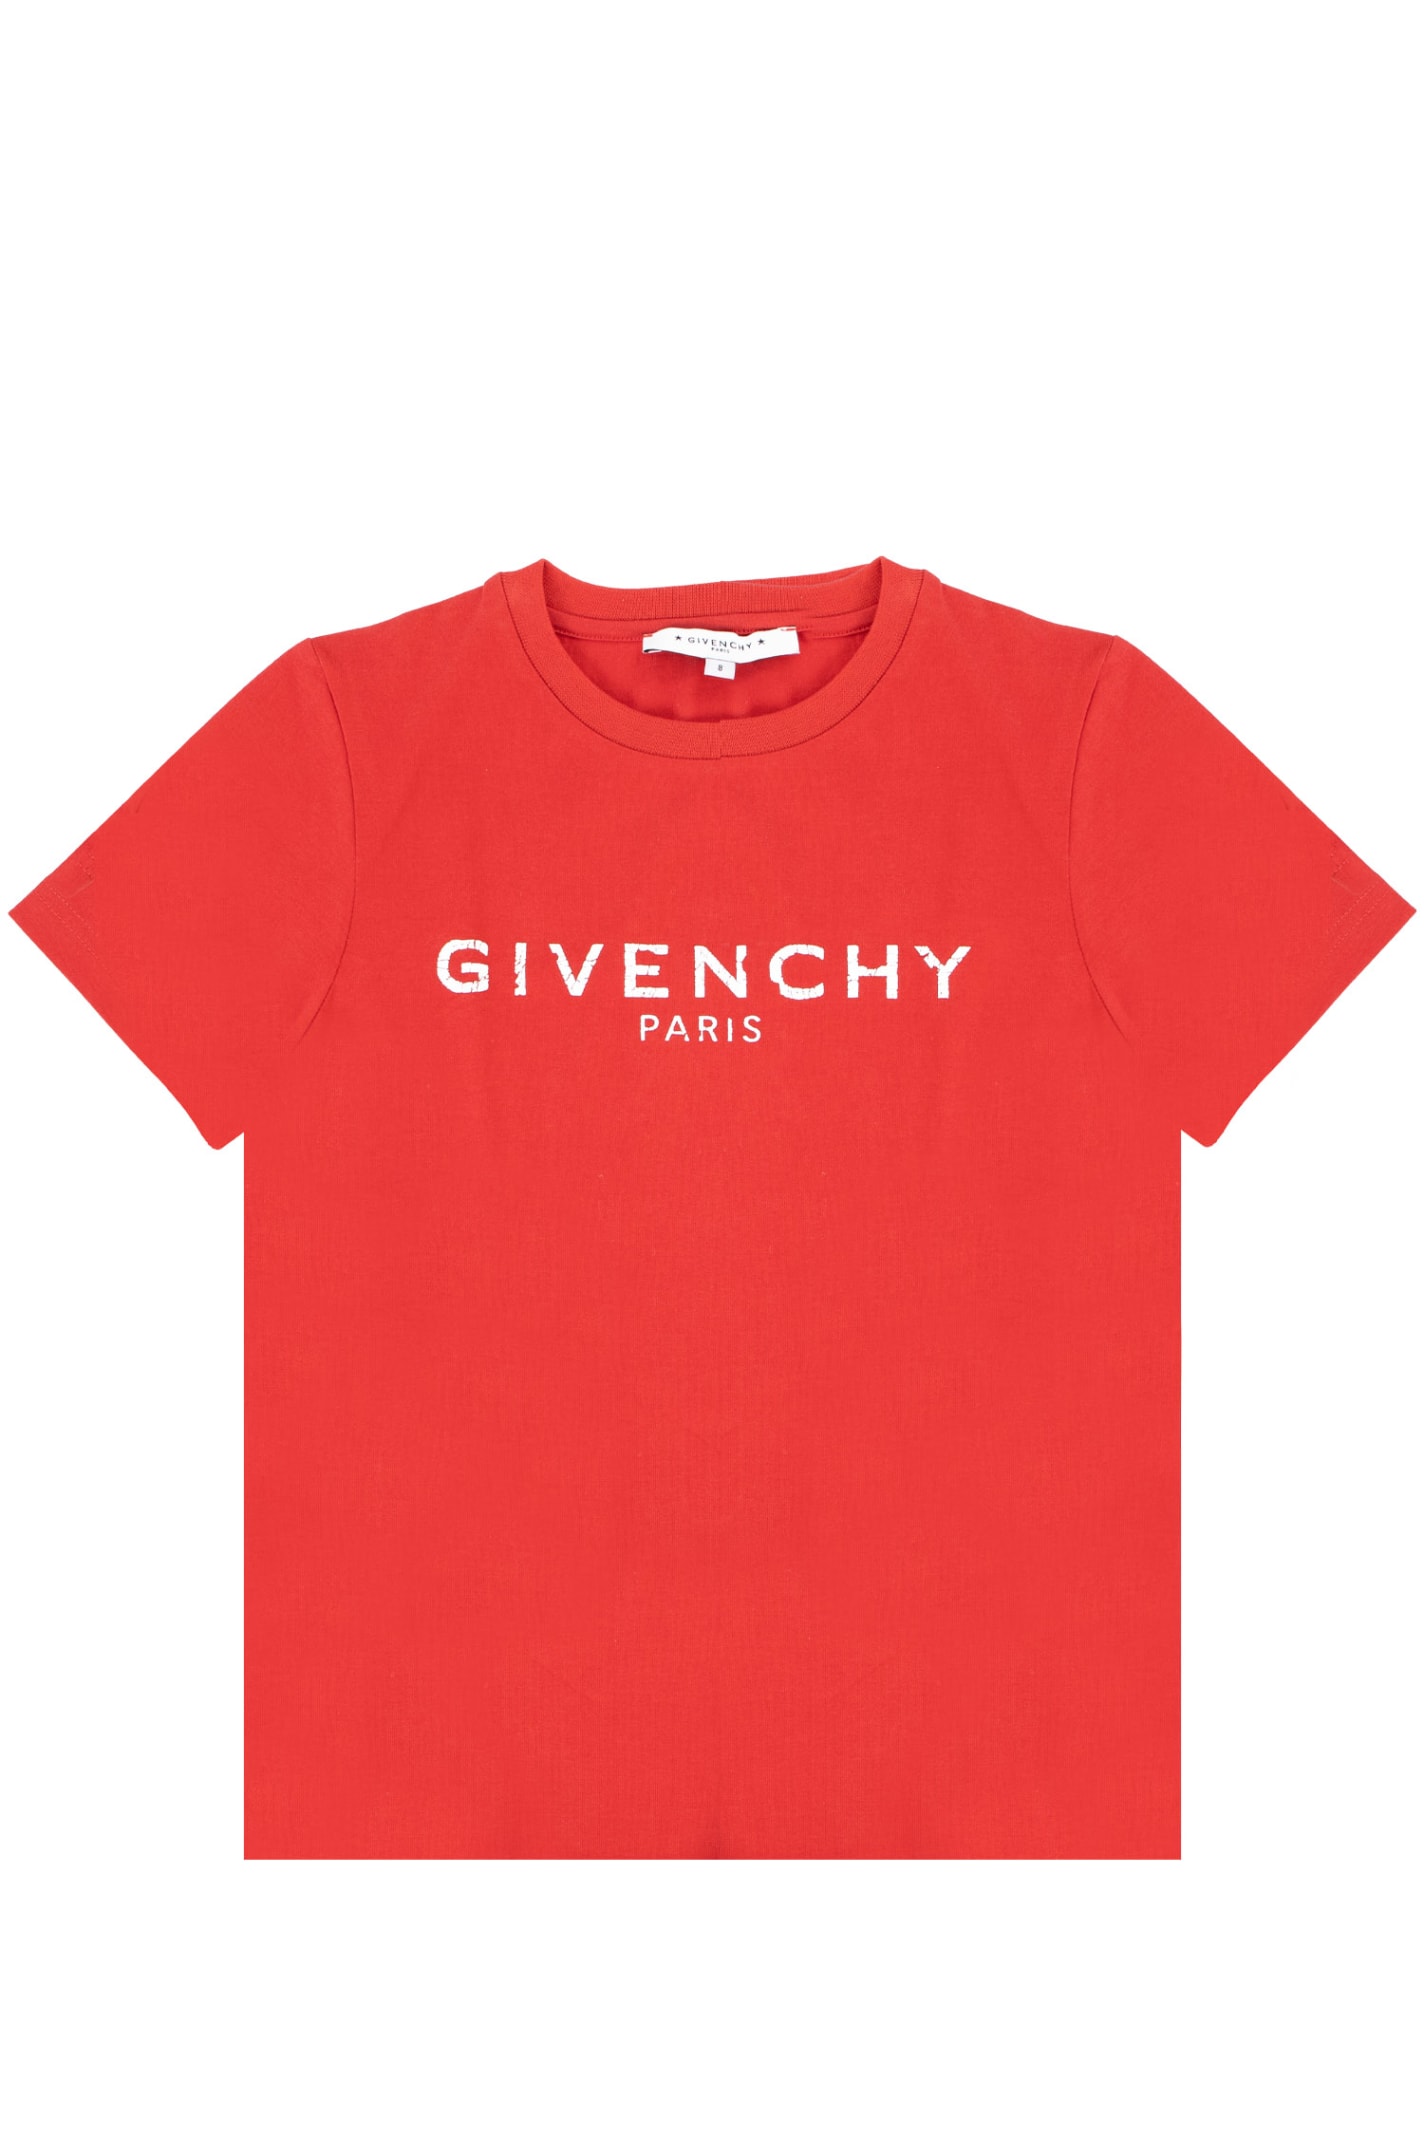 Givenchy Kids' Cotton T-shirt With Print In Red